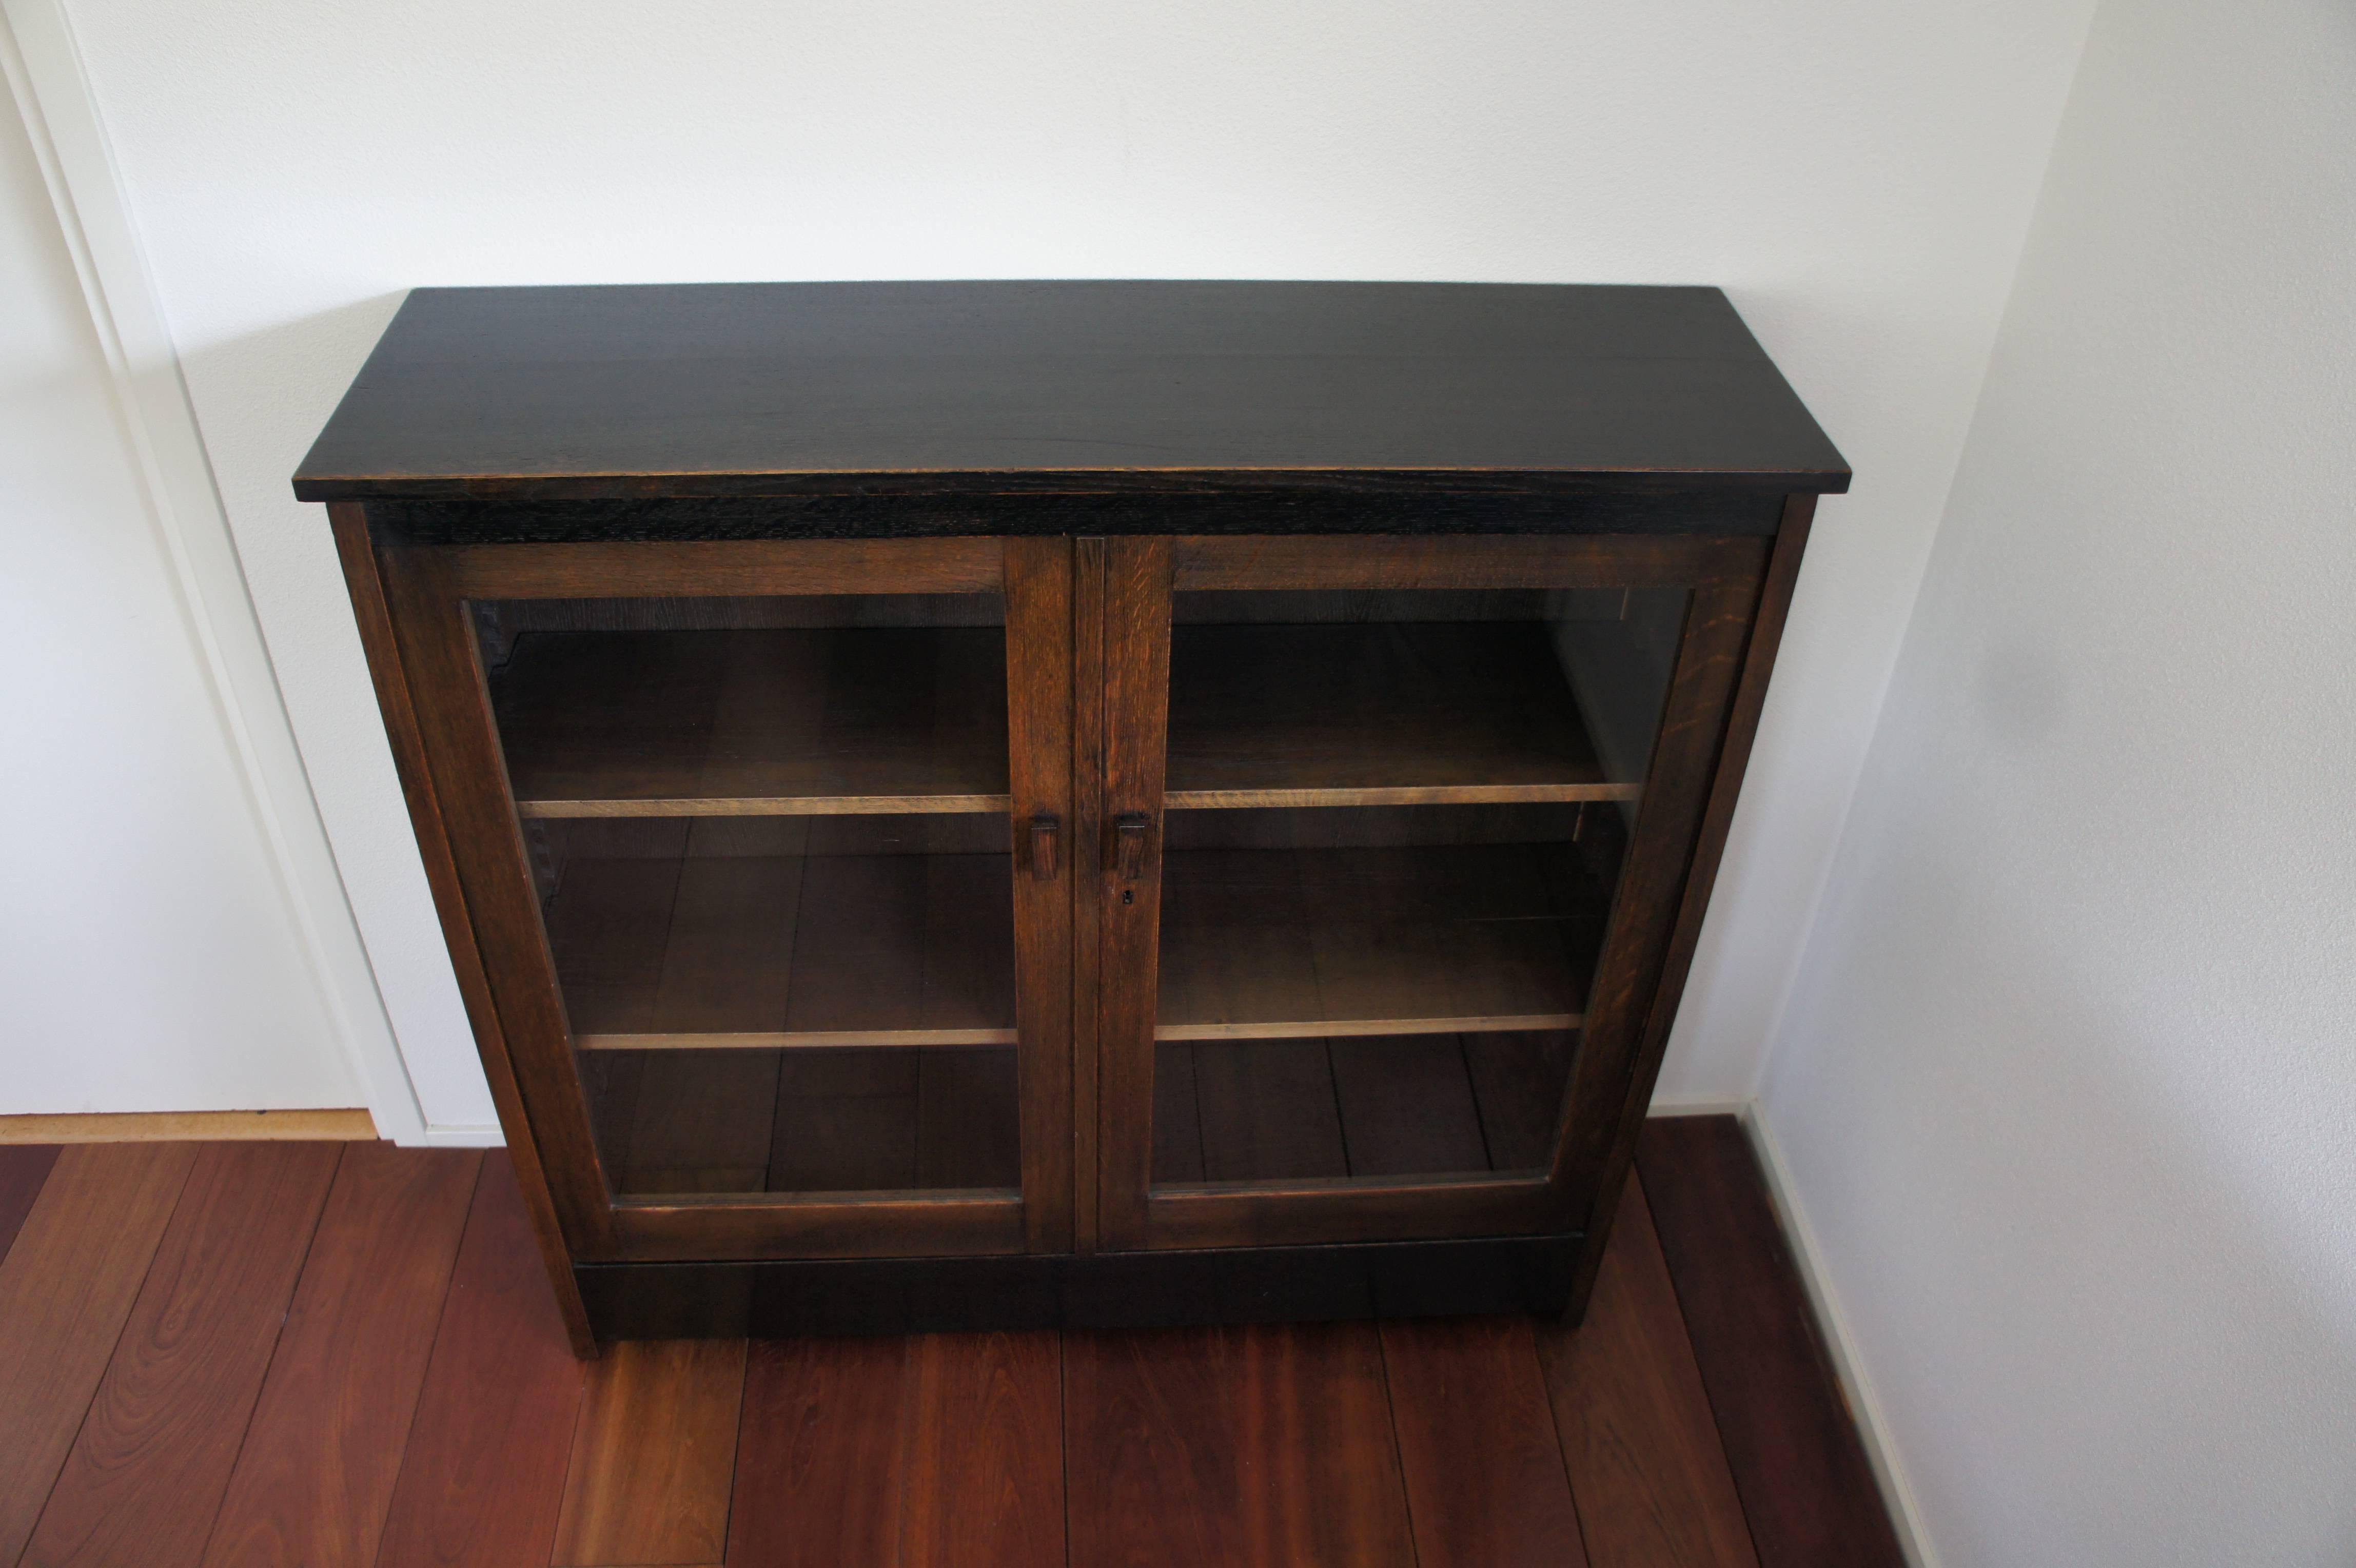 20th Century Art Deco Haagse School / The Hague School Desk and Bookcase by LOV Oosterbeek For Sale